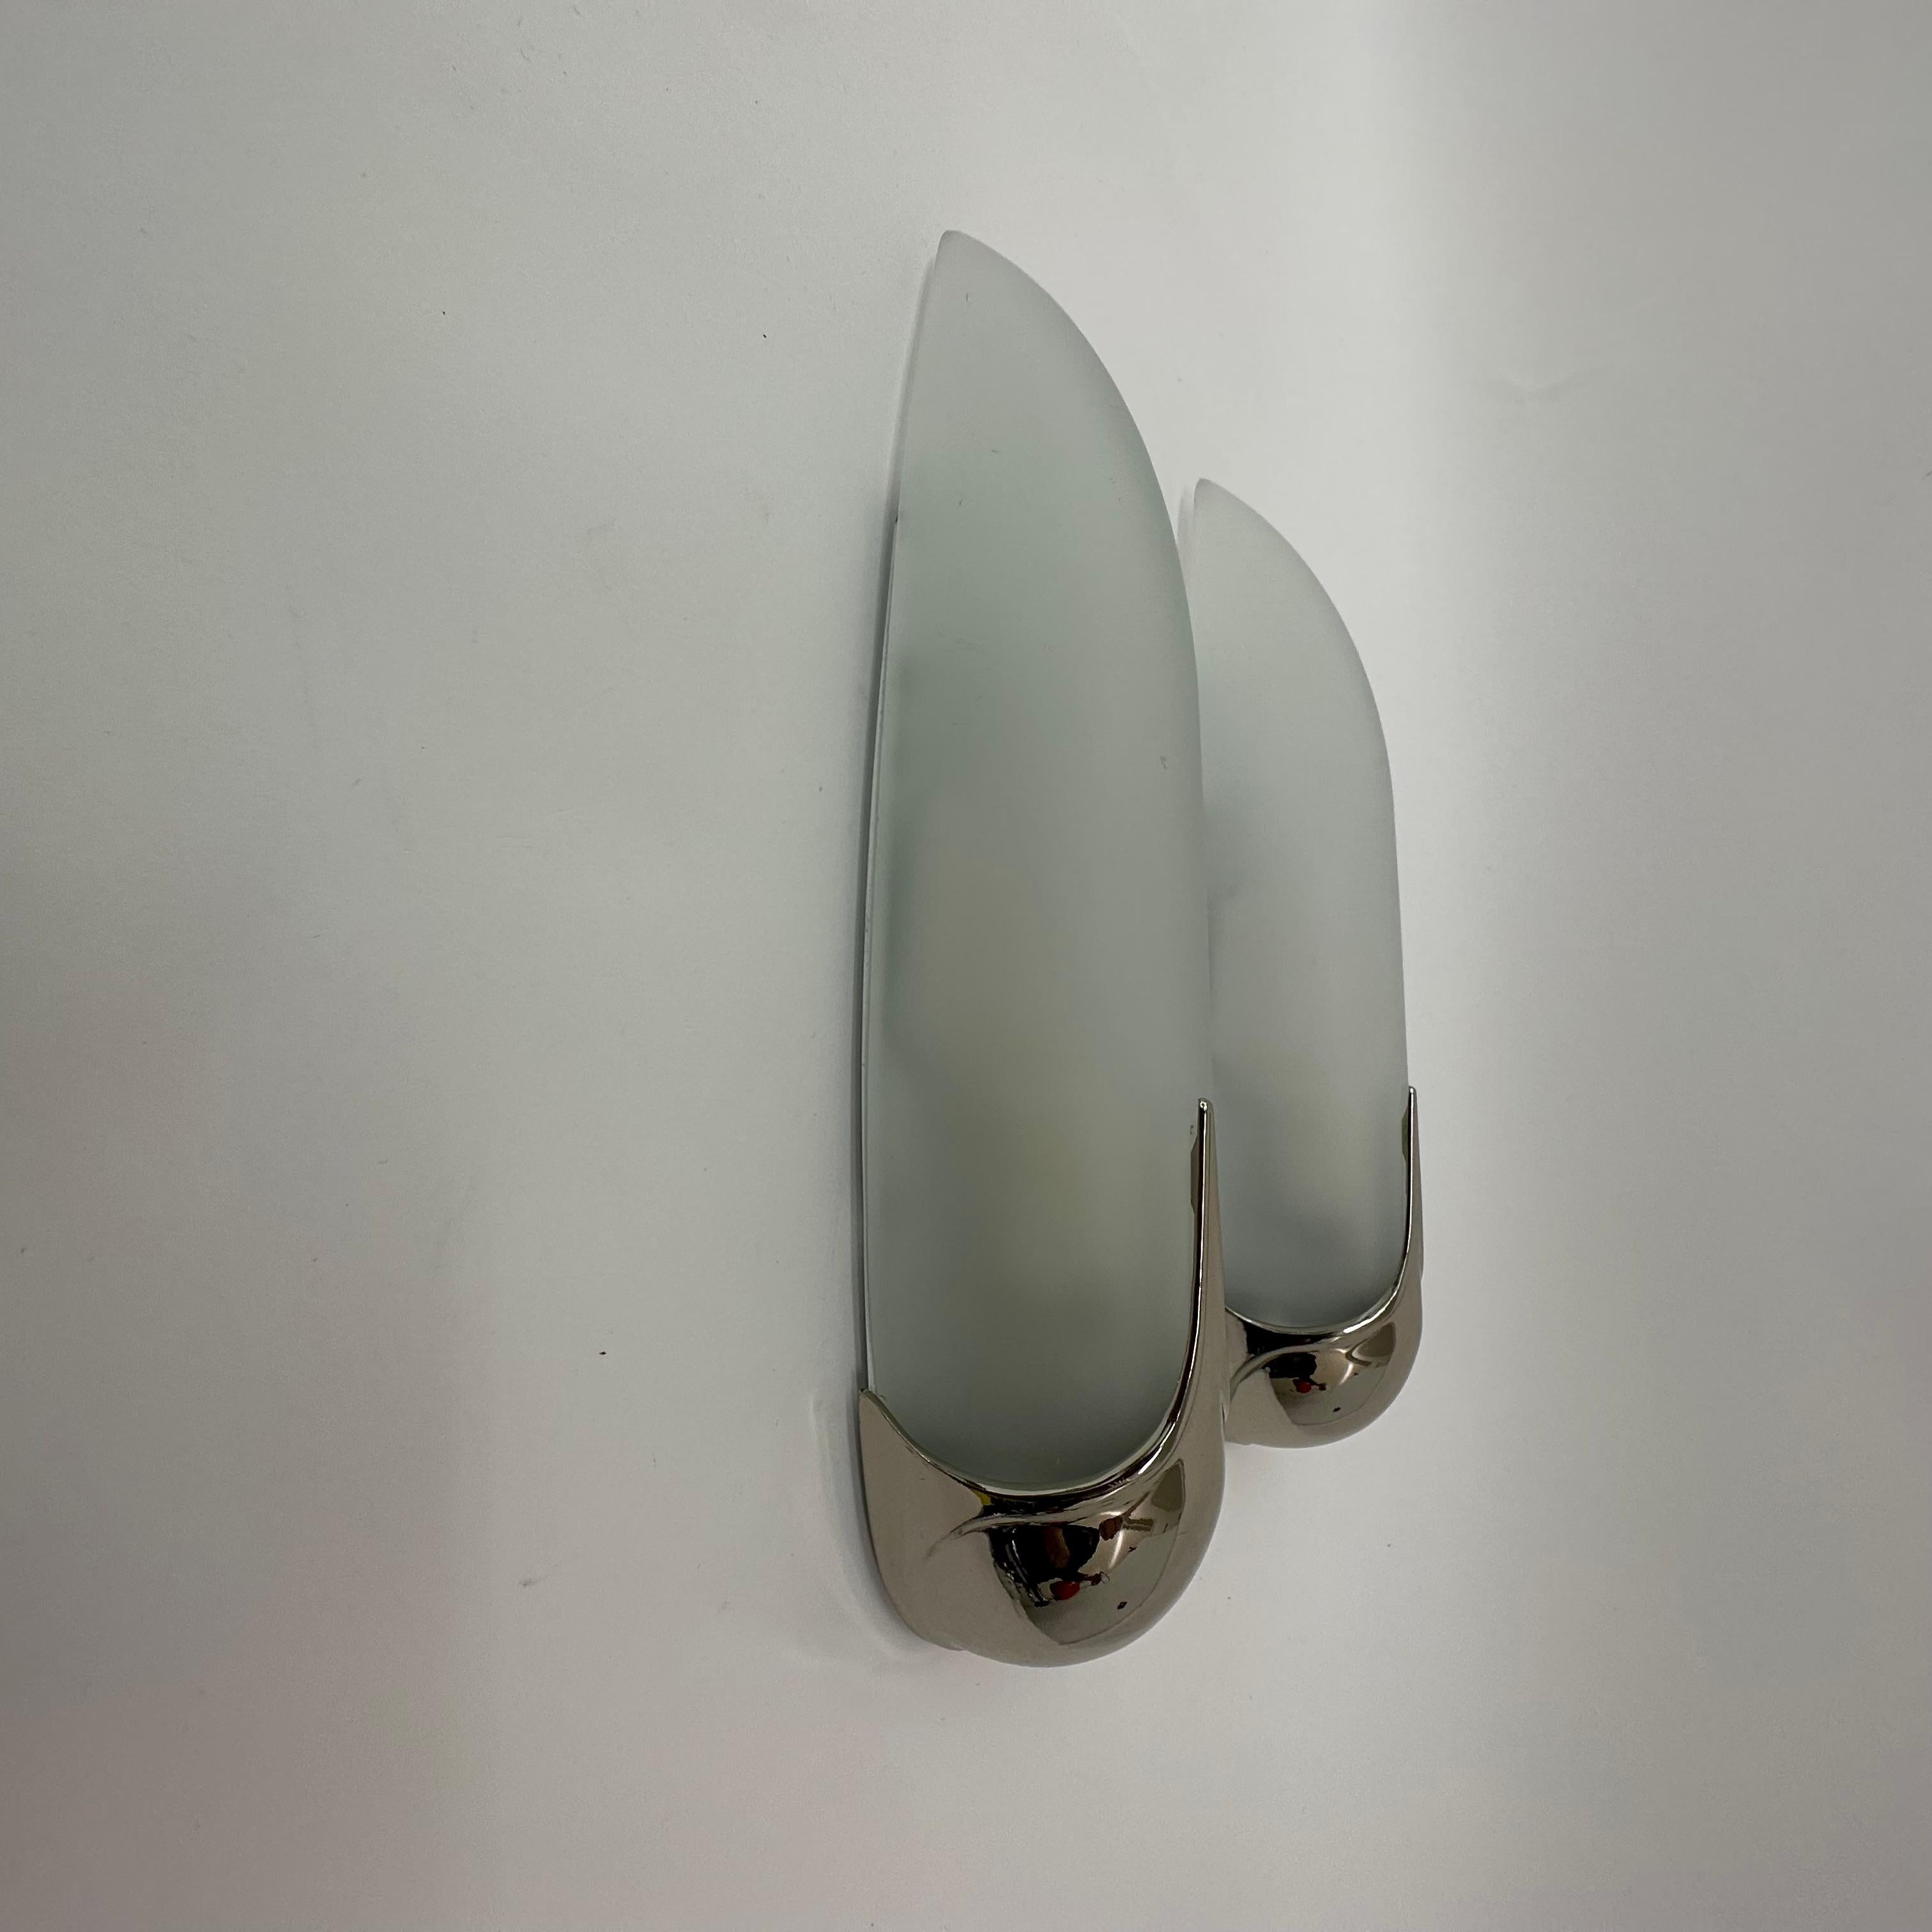 Pair of Idearte Sconces Wall Lamps, Spain, 1980s For Sale 5